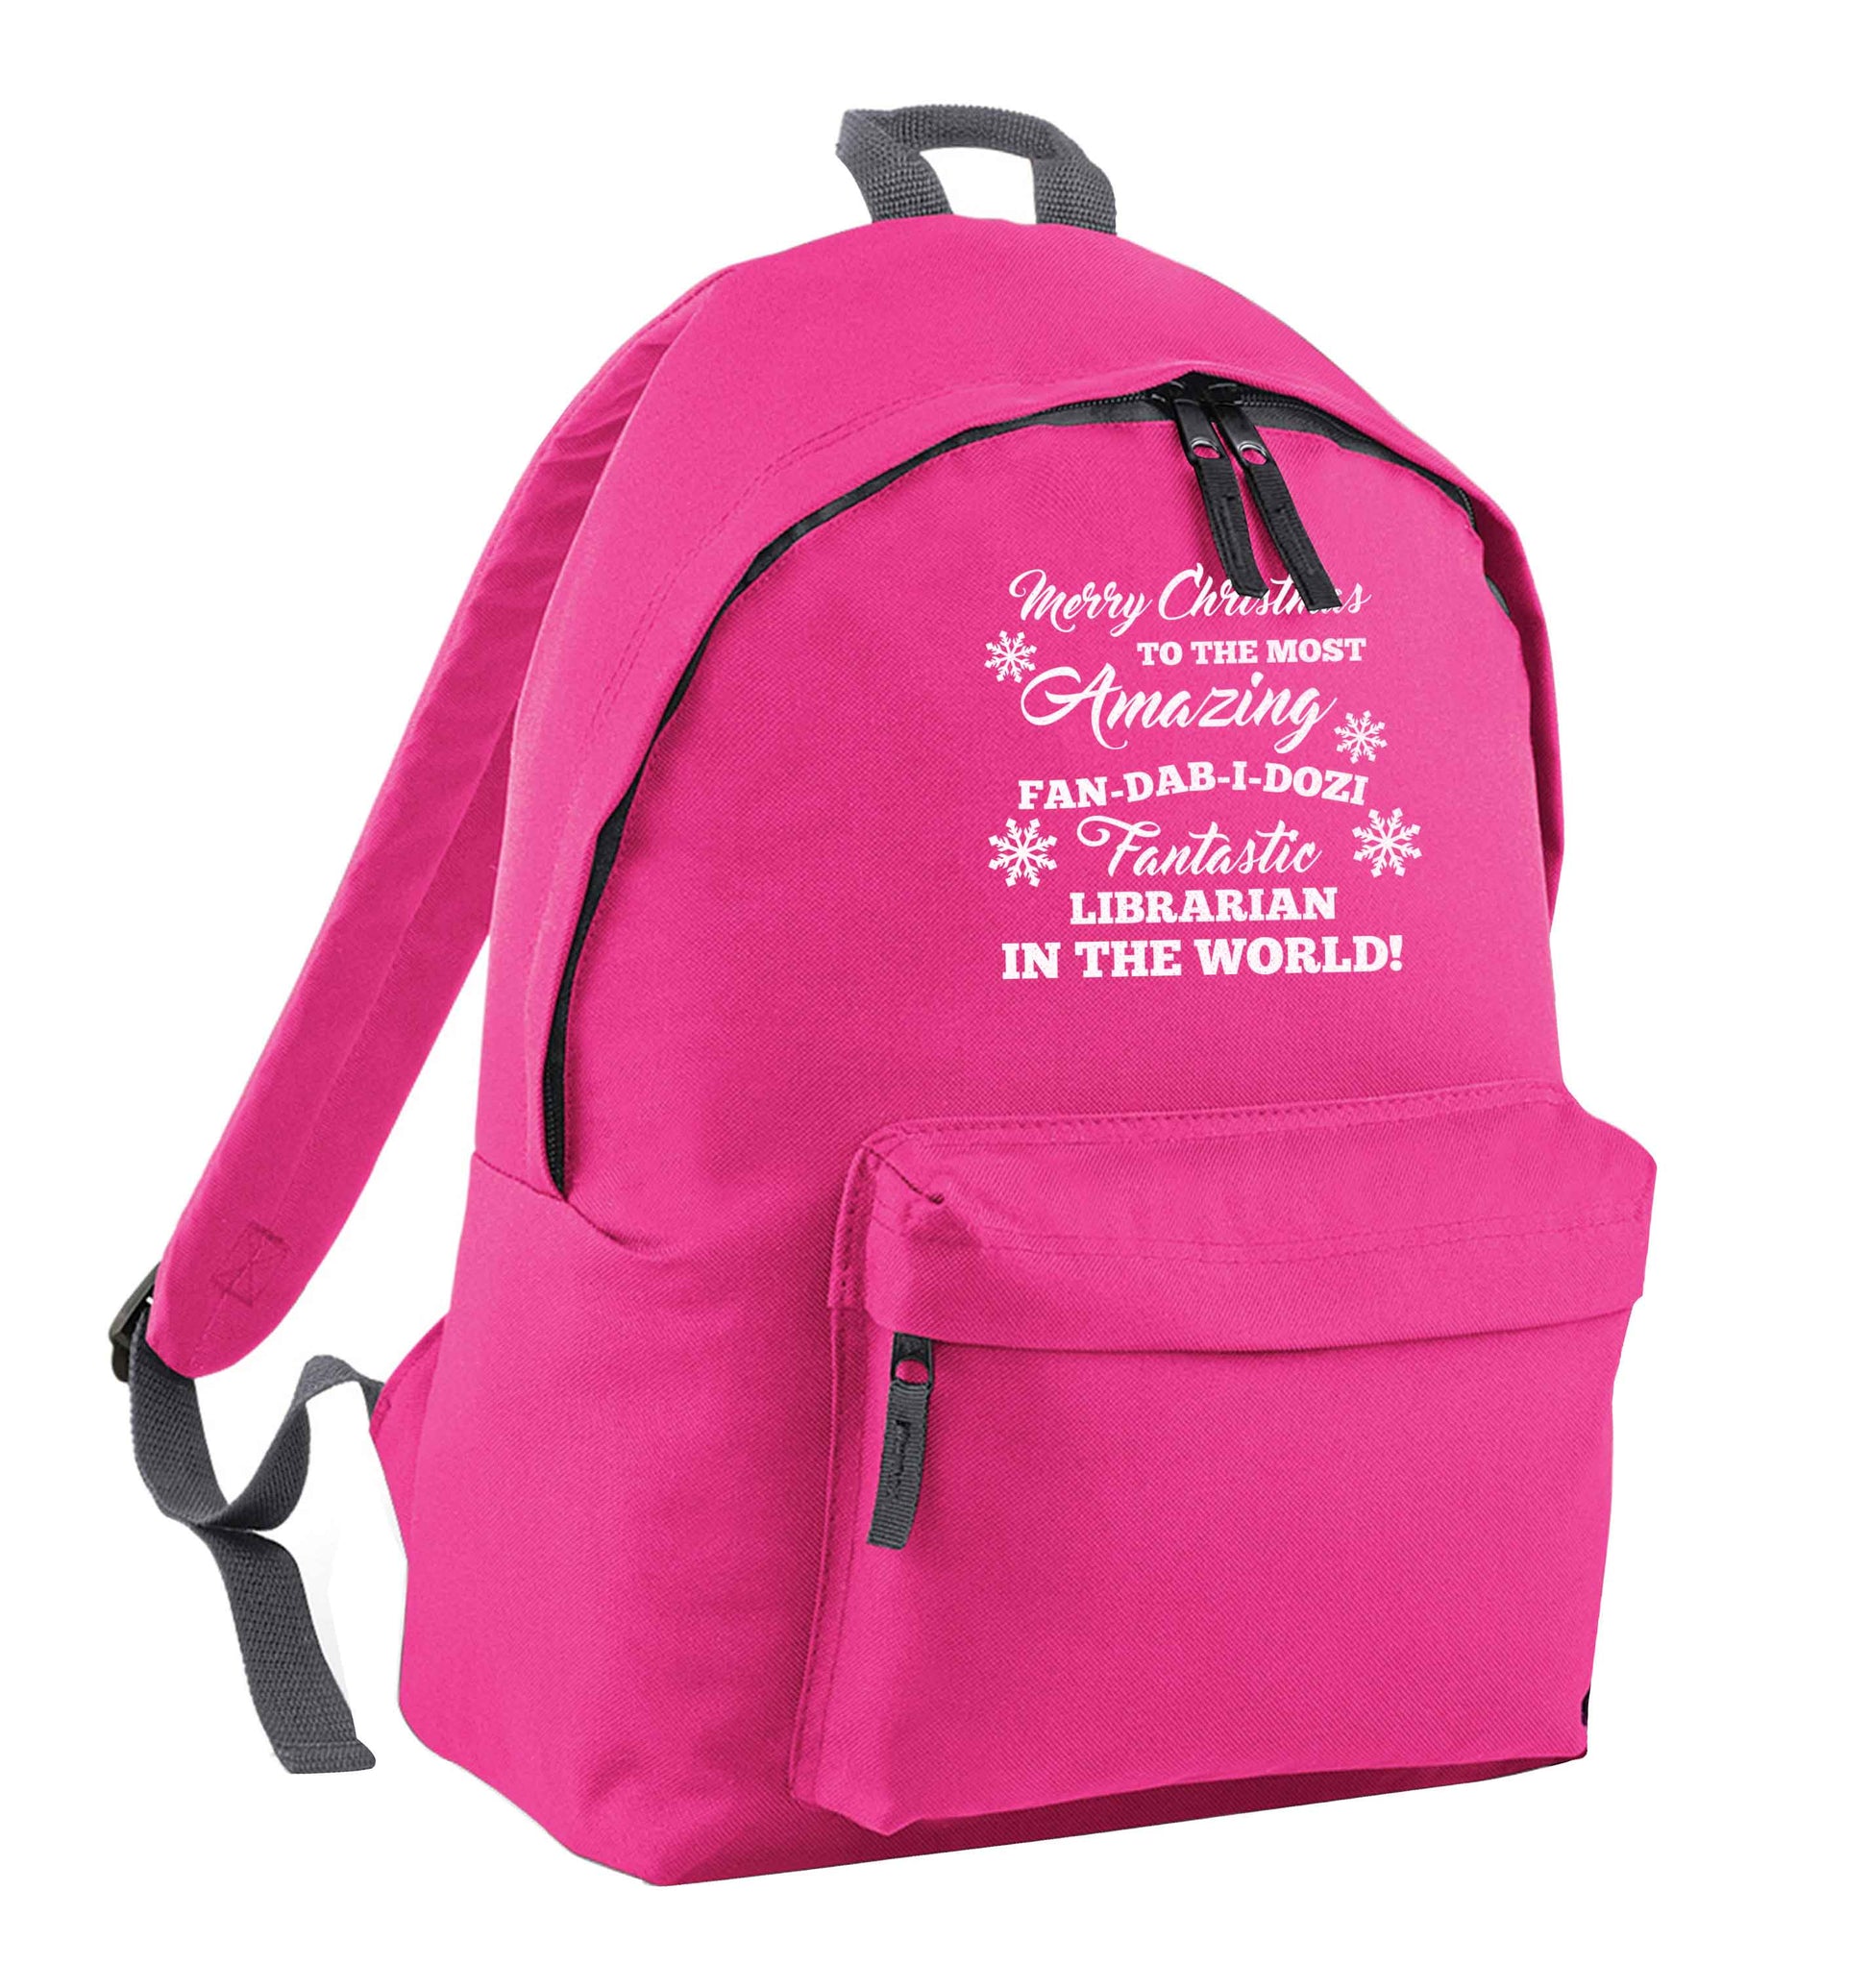 Merry Christmas to the most amazing librarian in the world! pink adults backpack